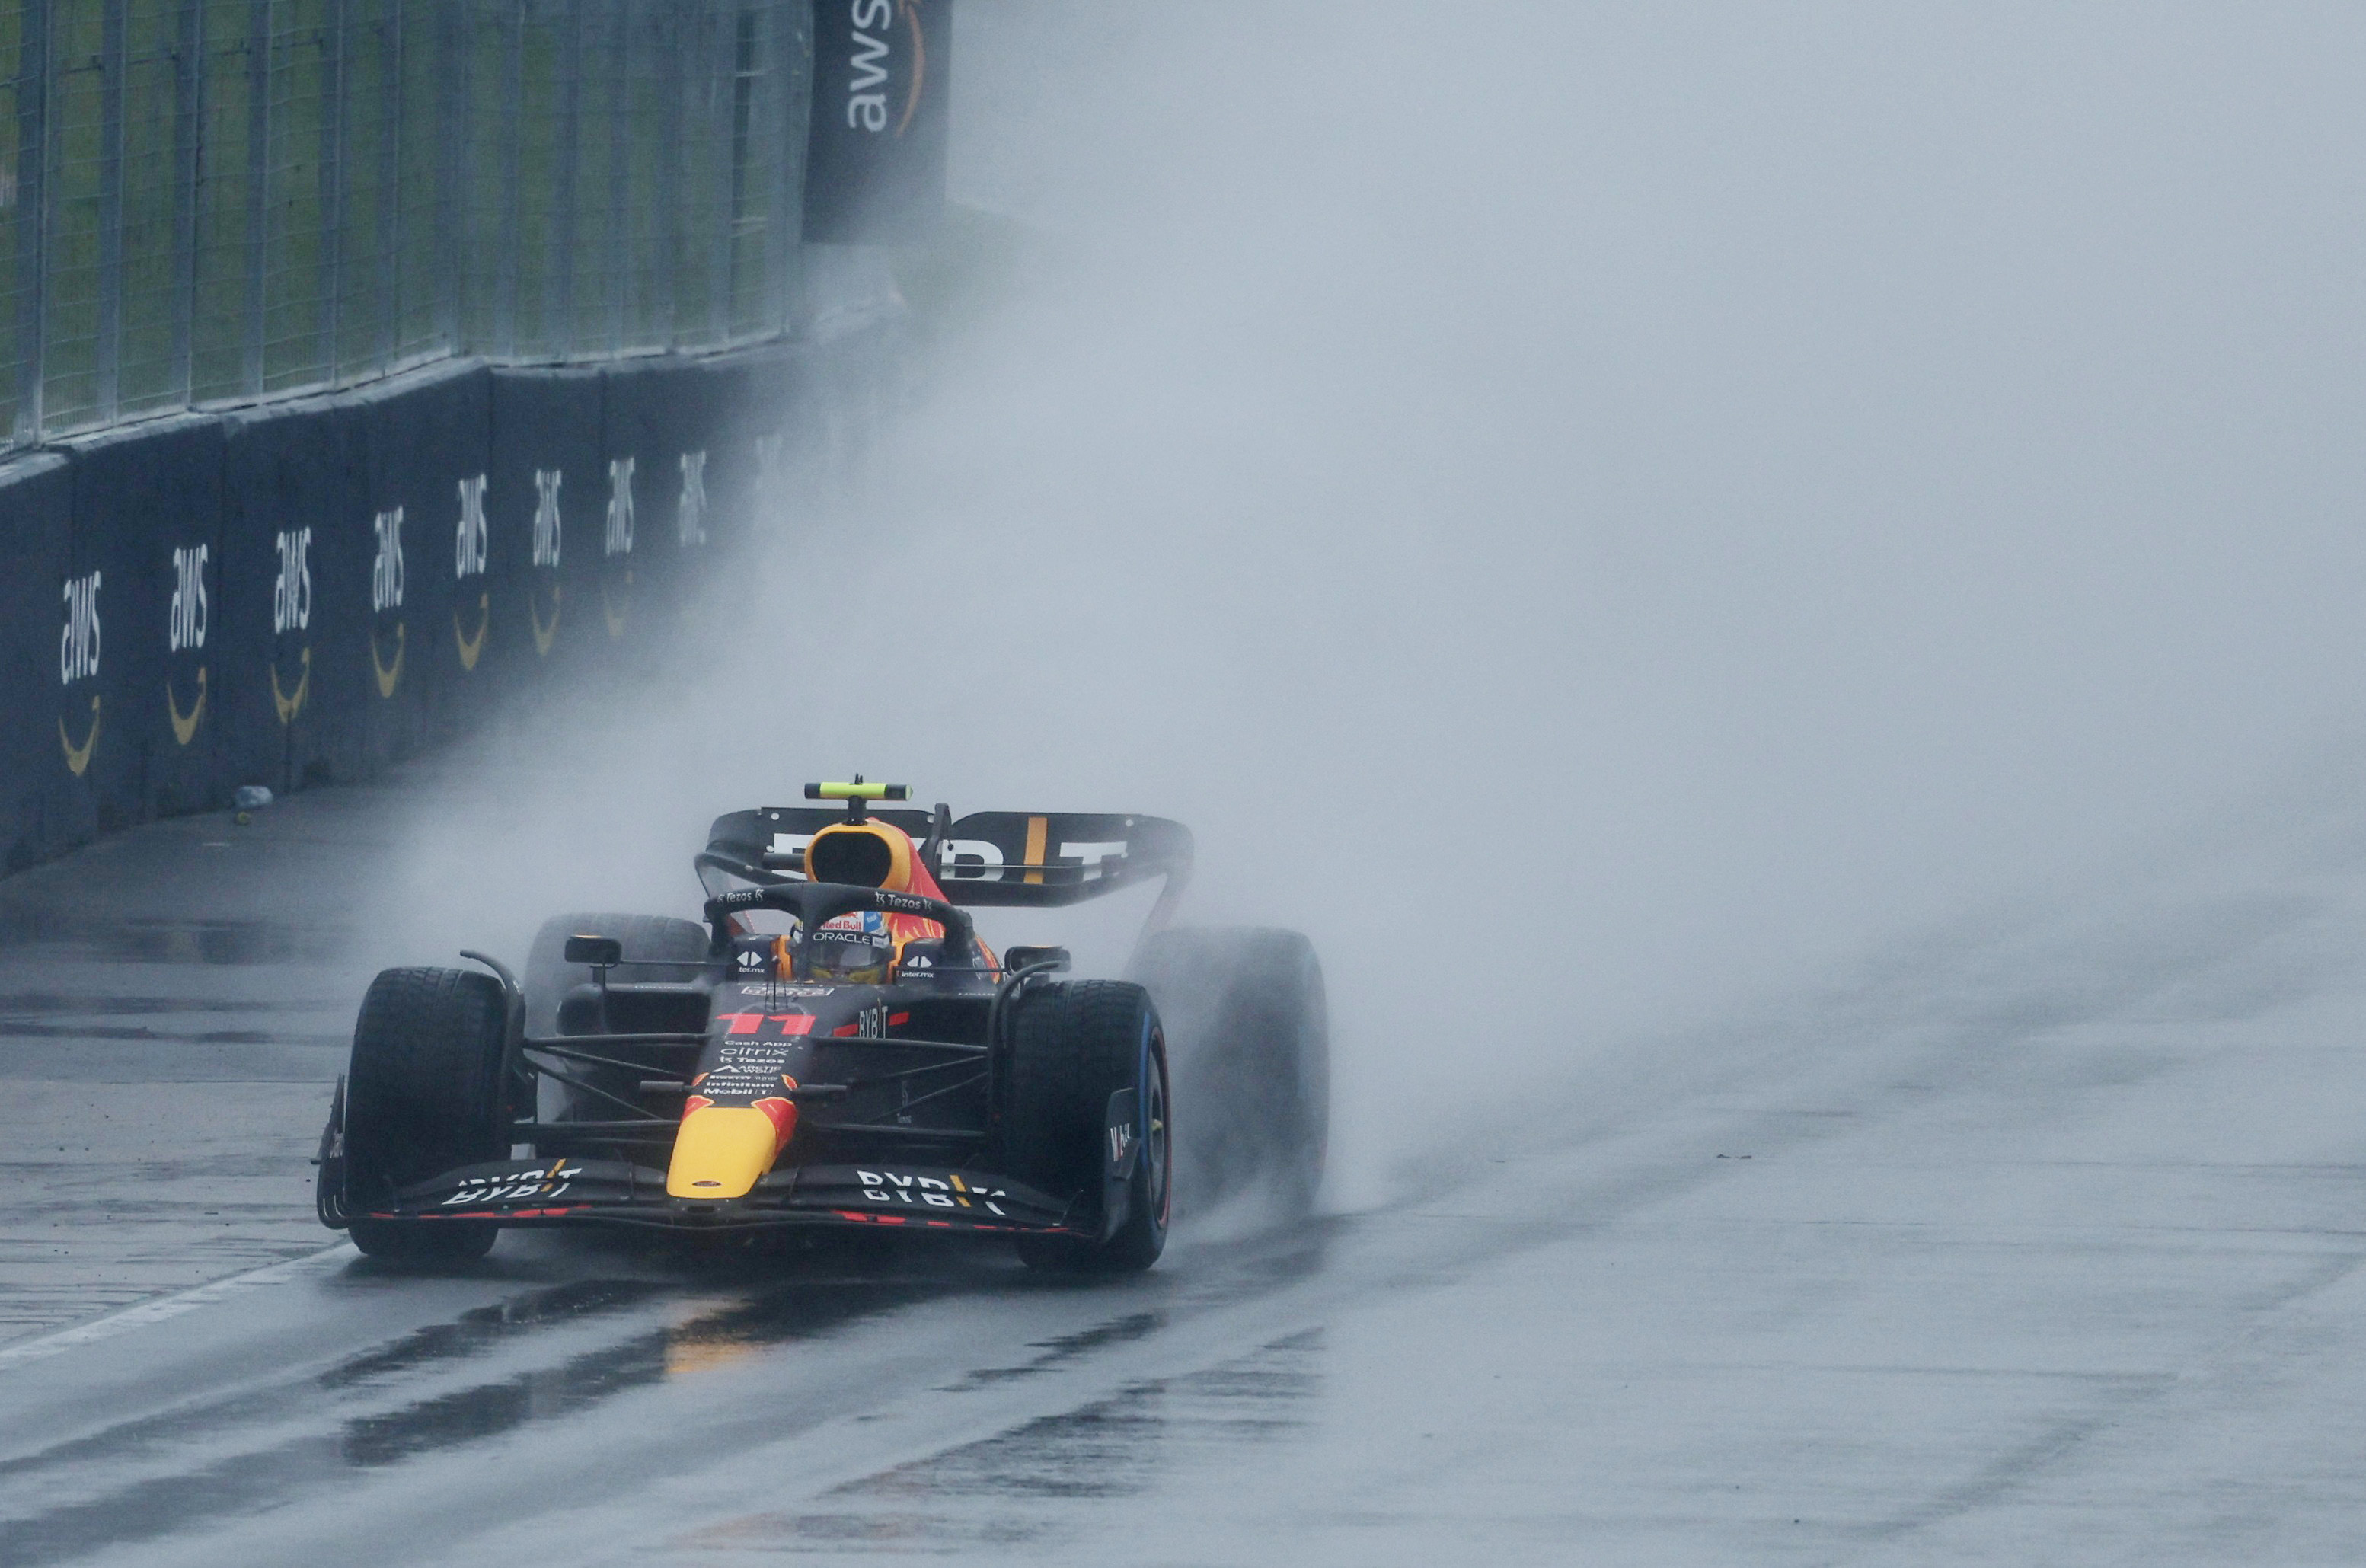 Perez will have to battle adverse weather conditions during the Canadian Grand Prix (Photo: Chris Hellgren/Reuters)